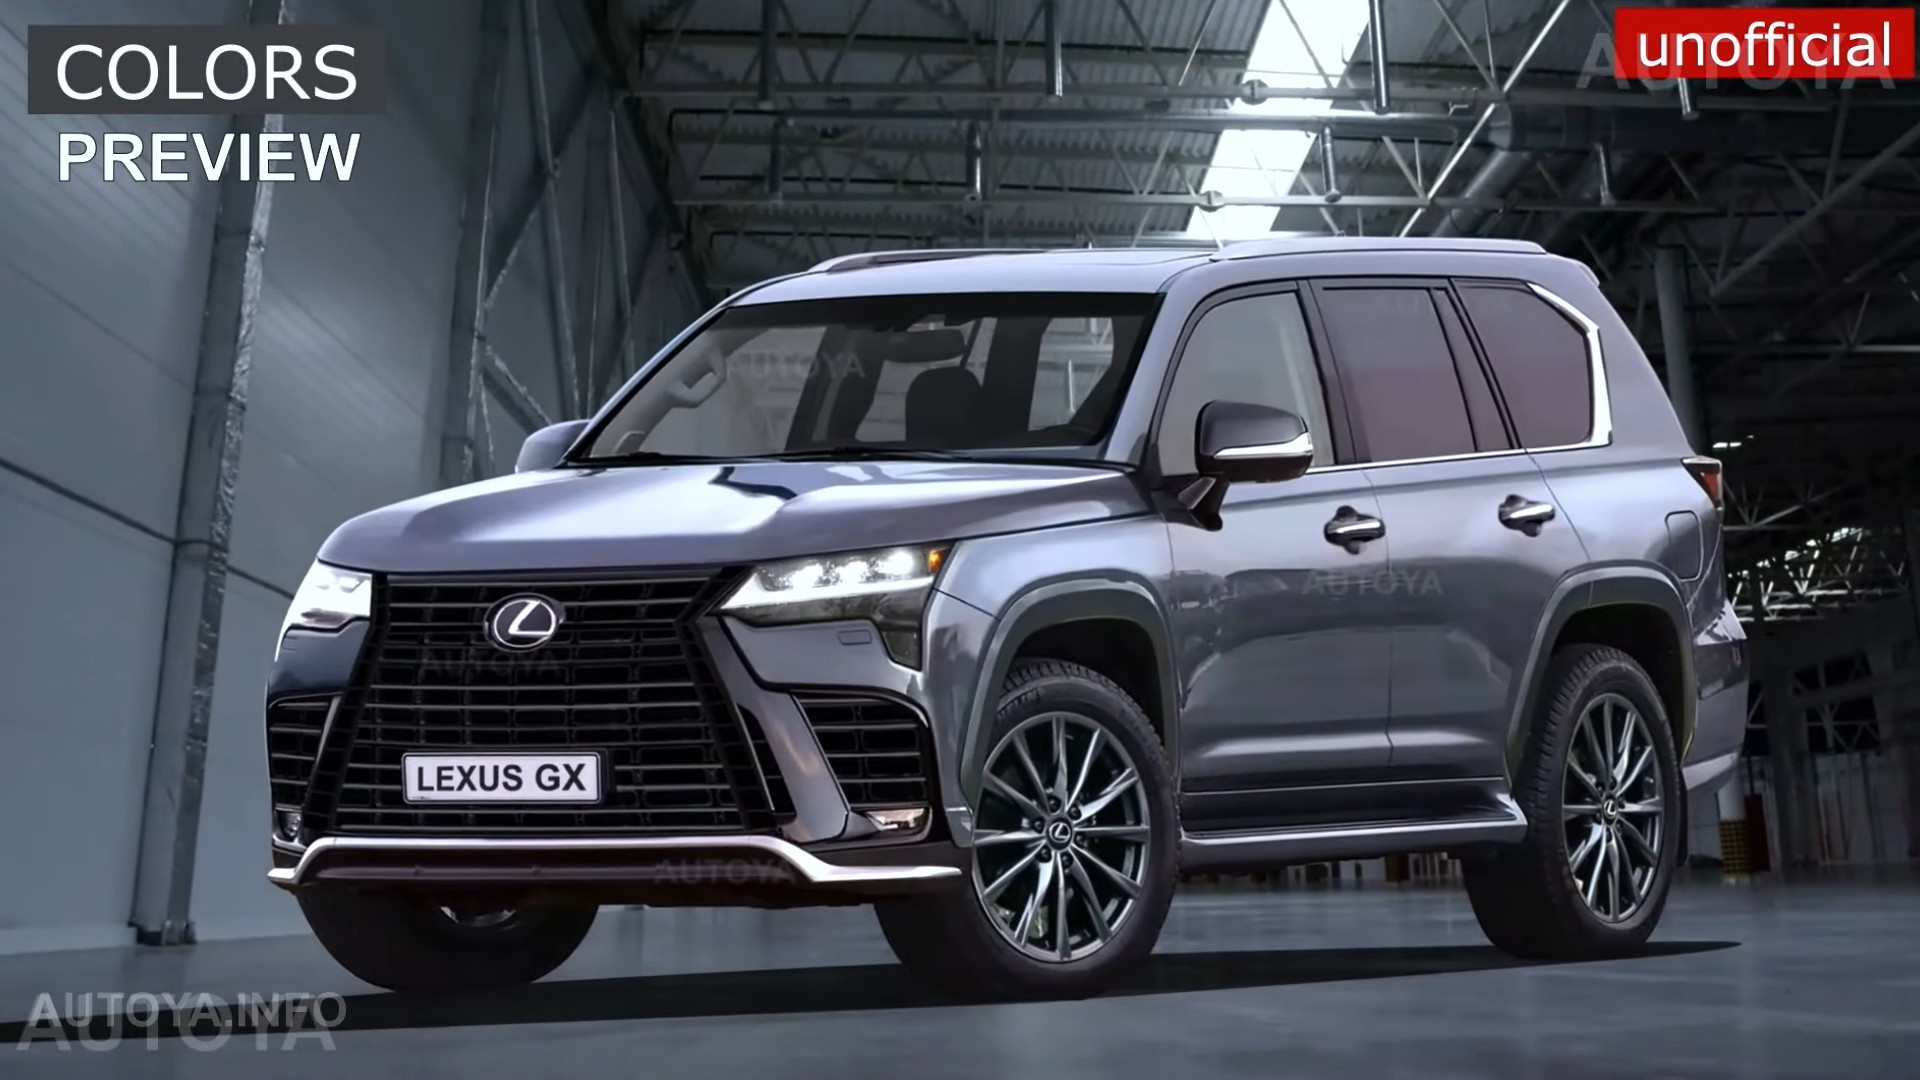 2024 Lexus TX ThreeRow 8Seat CUV and Tough 2024 GX OffRoad SUV Share